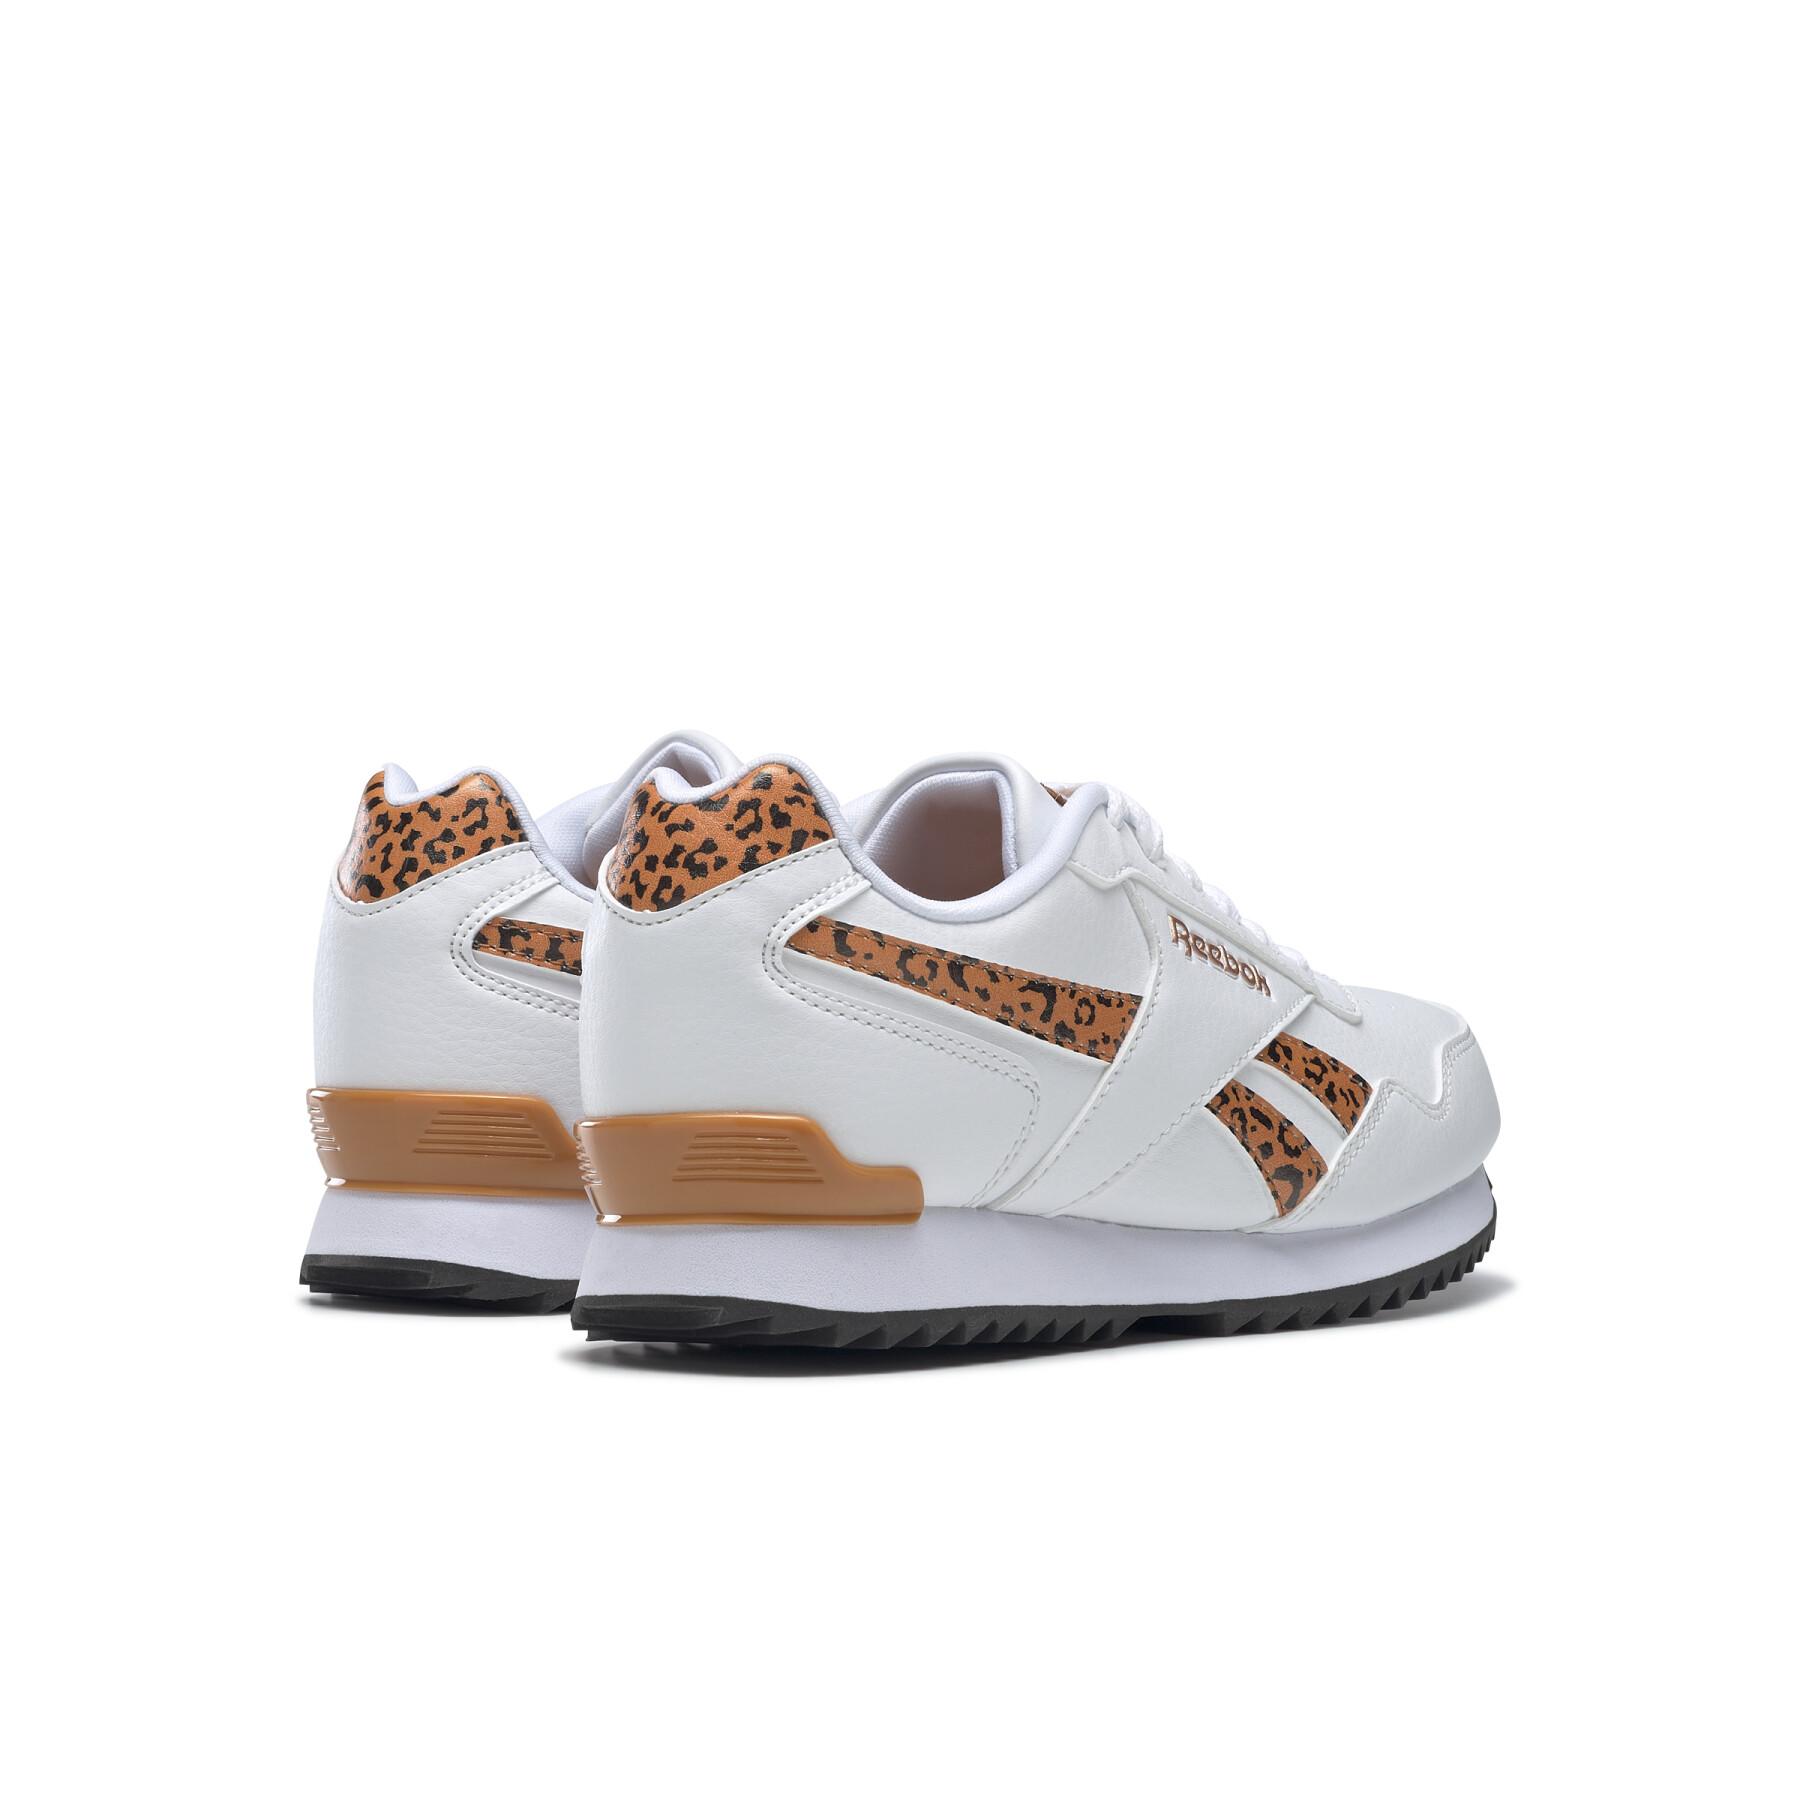 Chaussures fille Reebok Royal Glide